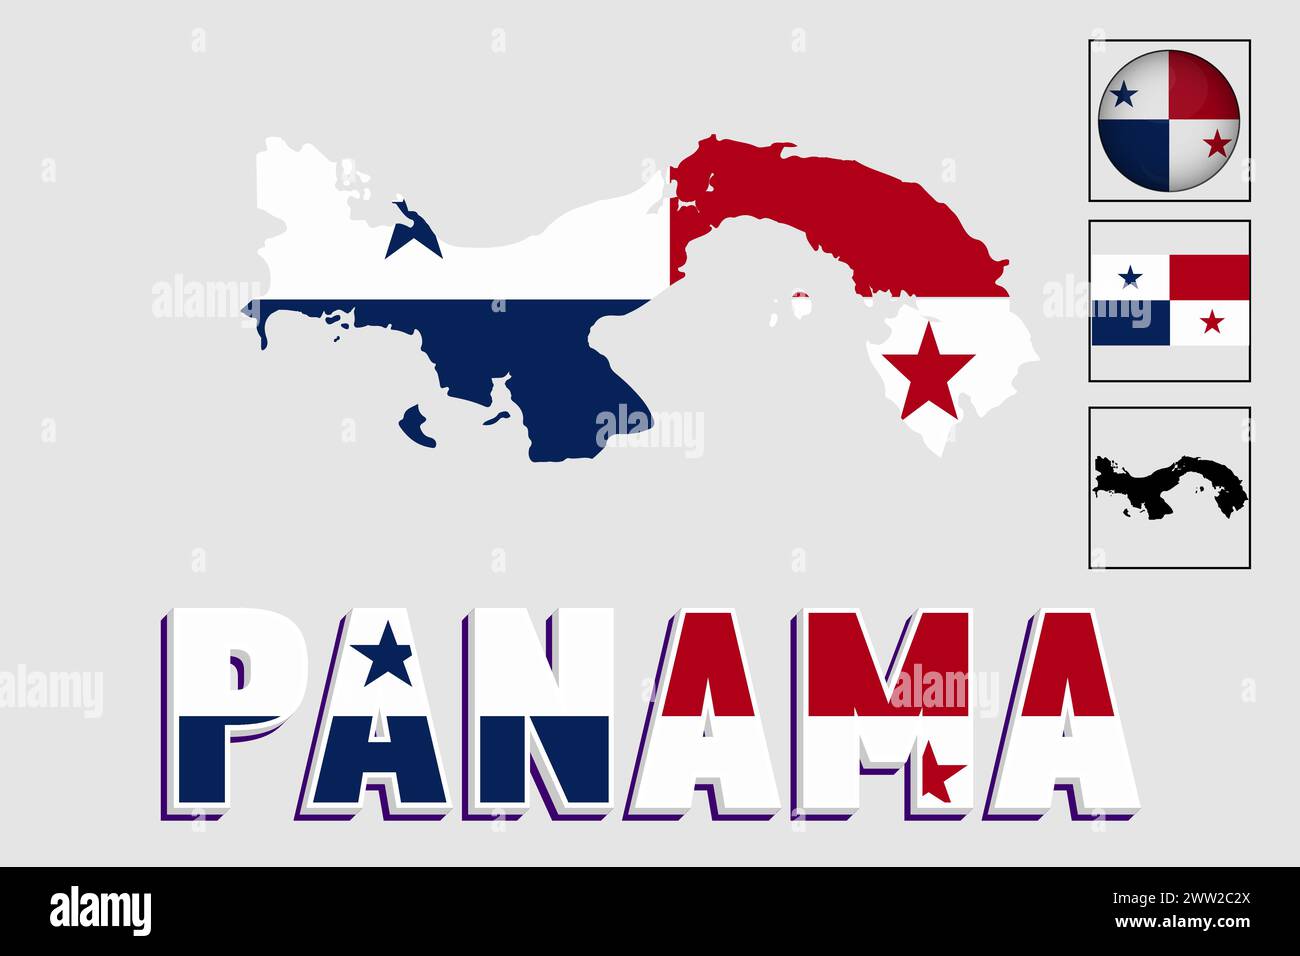 Panama flag and map in a vector graphic Stock Vector